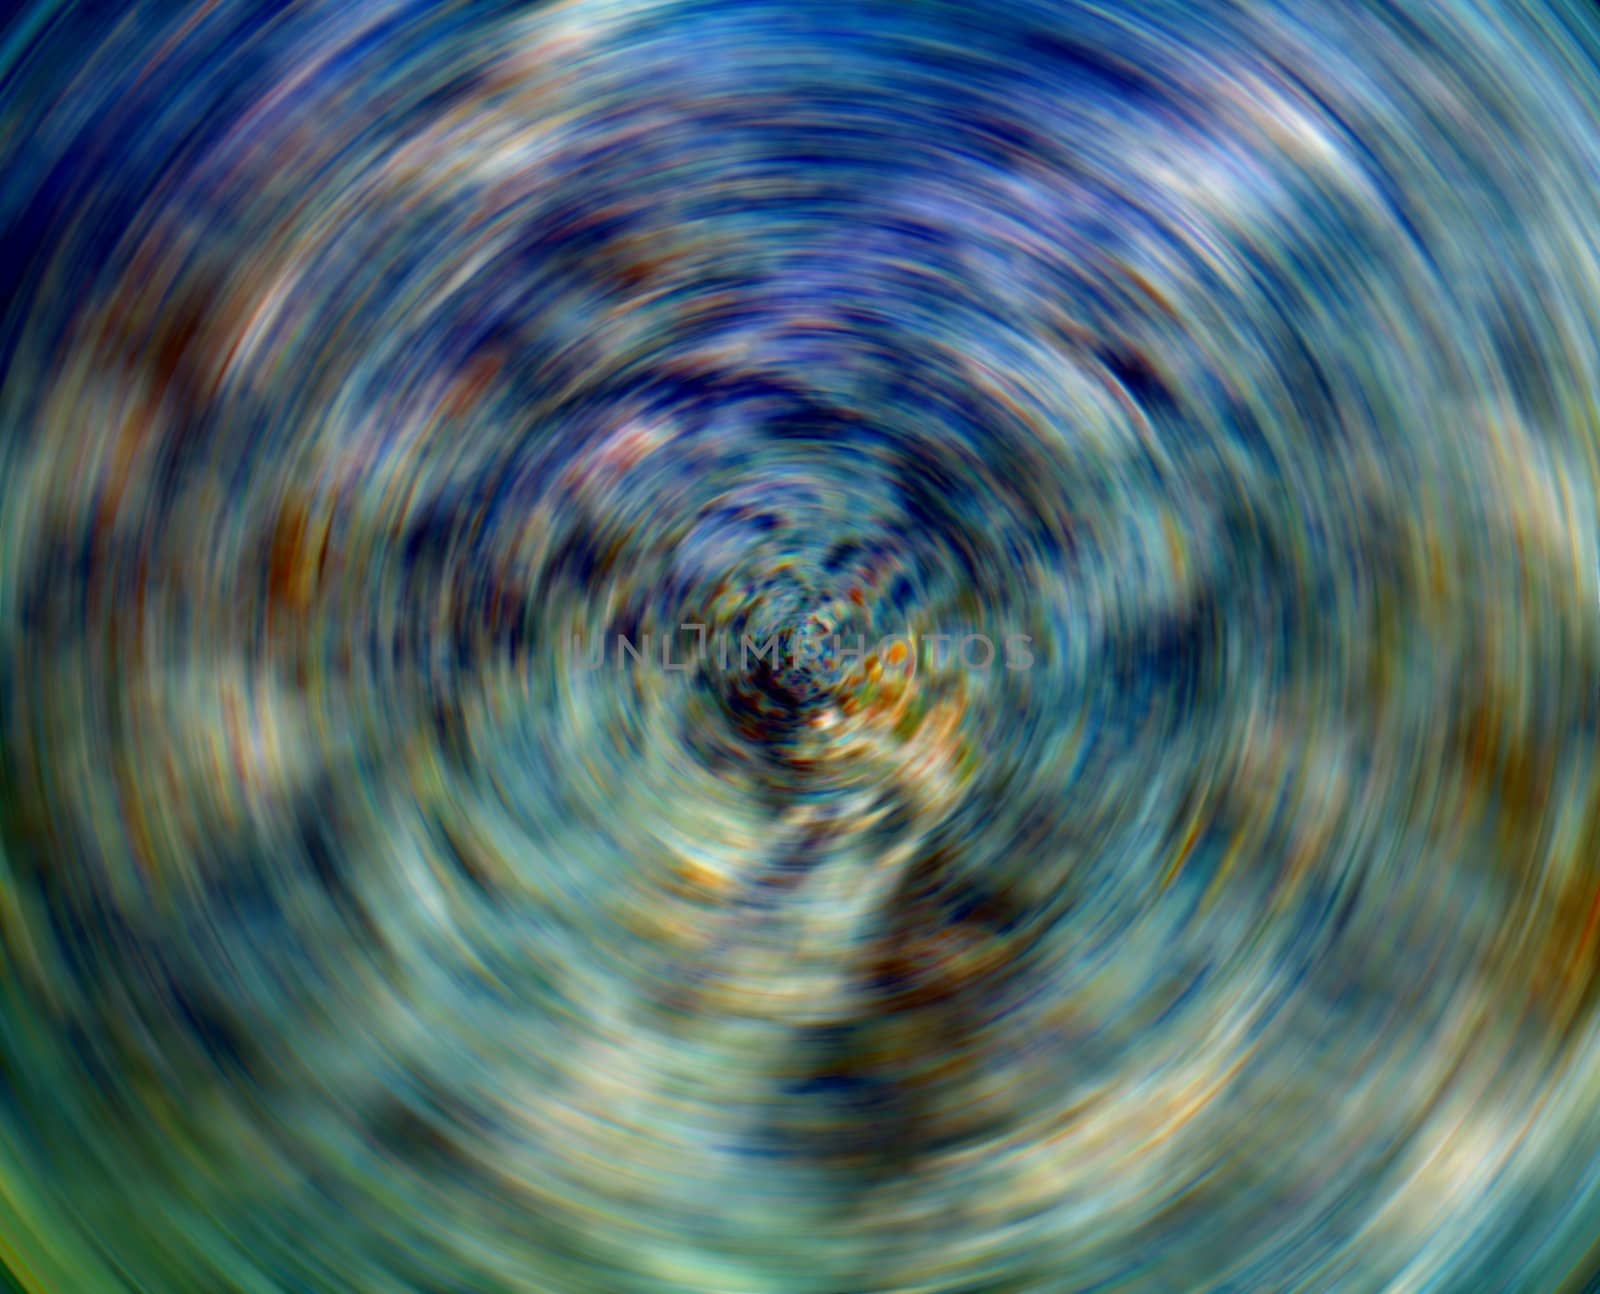 An abstract image of spinning blue and green colors.